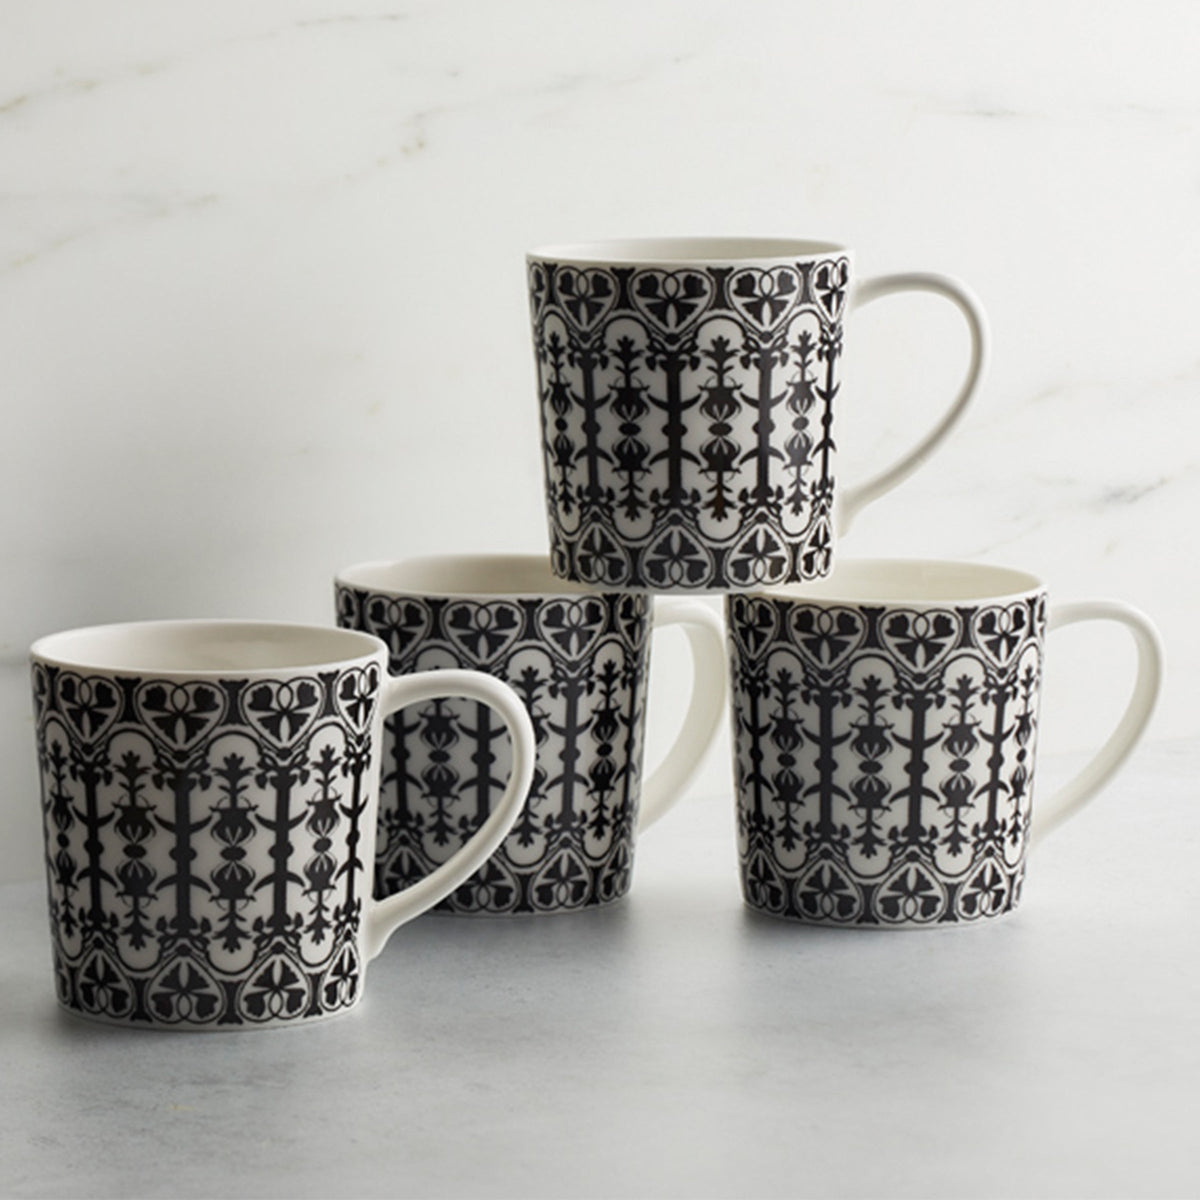 Four Casablanca Mugs by Caskata Artisanal Home, with black intricate geometric and floral patterns, arranged in a square formation on a light gray surface against a white marble backdrop, echo the exquisite charm of Casablanca dinnerware.